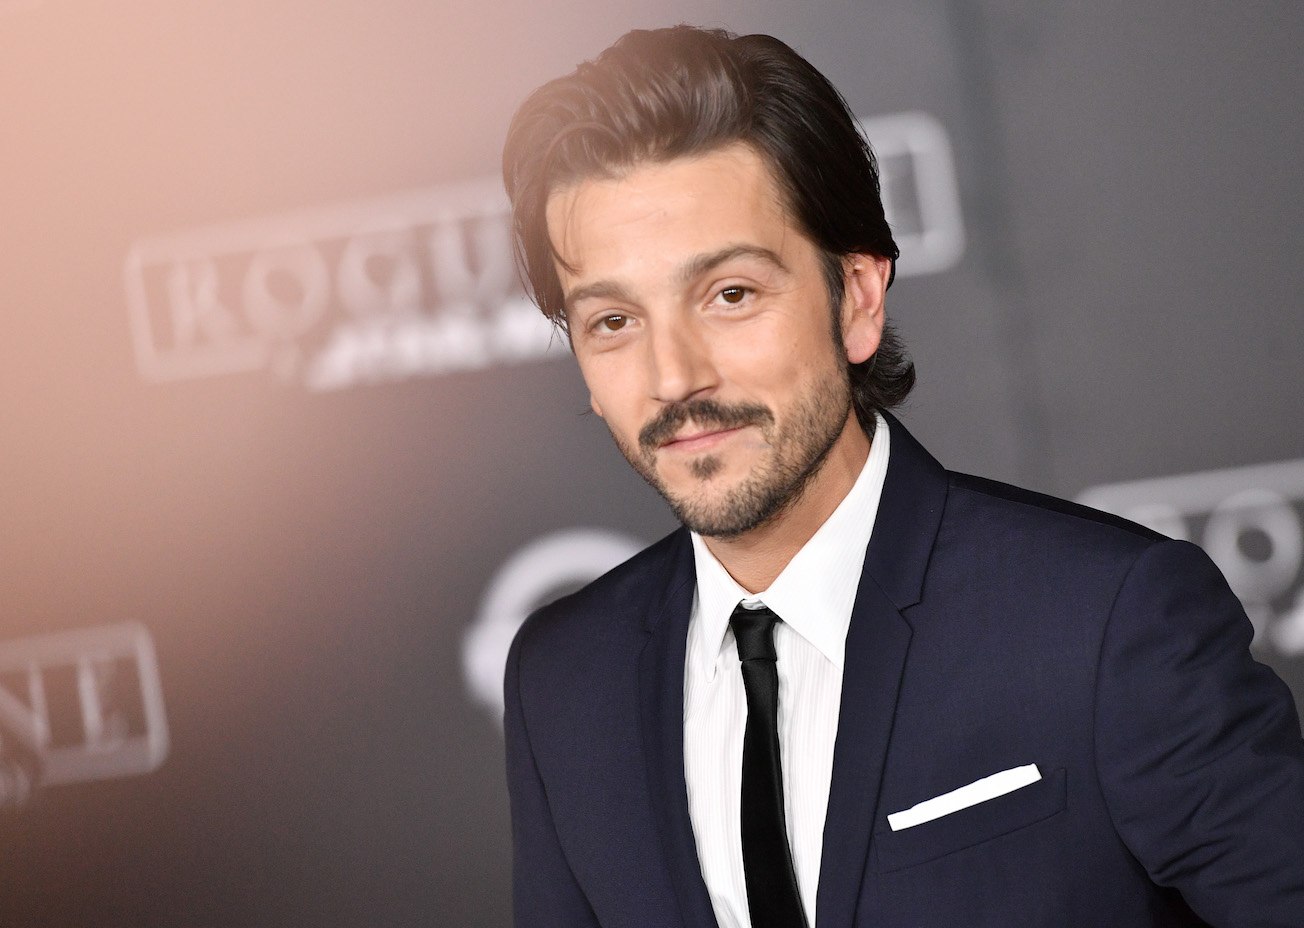 Actor Diego Luna attends the premiere of Walt Disney Pictures and Lucasfilm's "Rogue One: A Star Wars Story" at the Pantages Theatre on December 10, 2016 in Hollywood, California. 